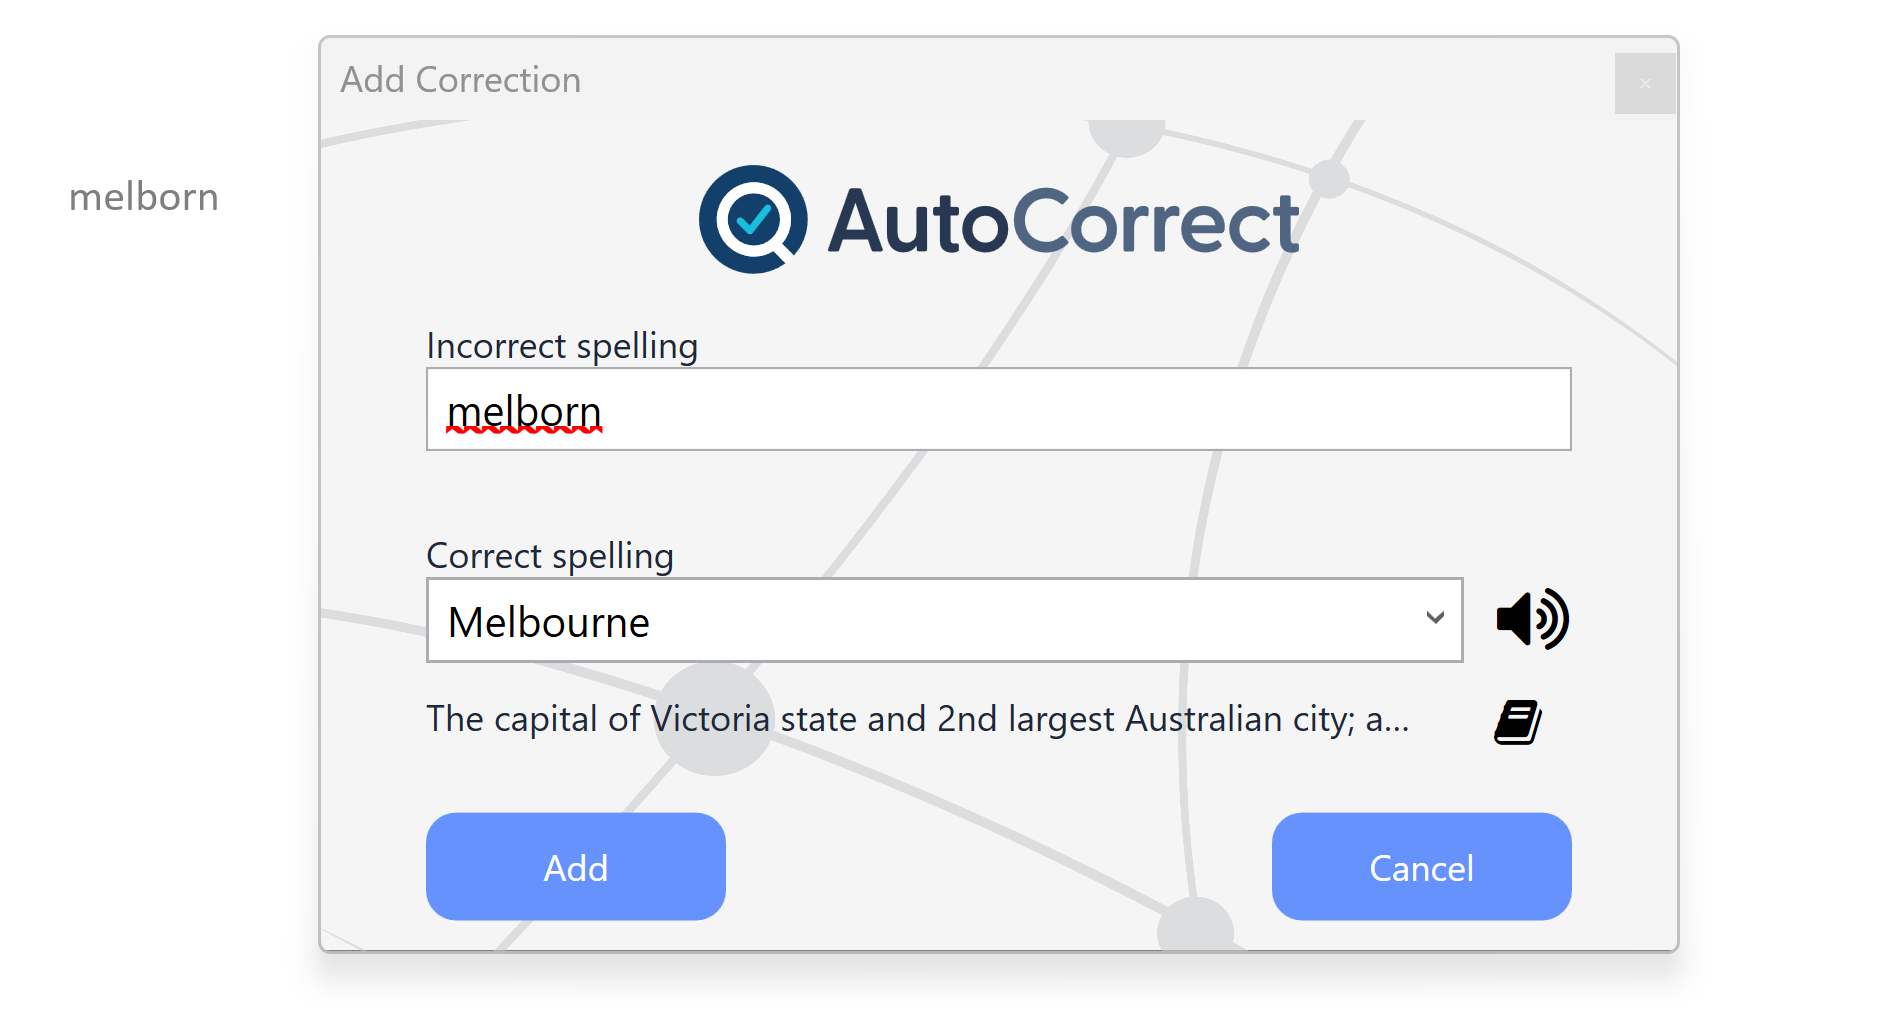 The Add Correction window, showing Melbourne spelt incorrectly at the top and the correct spelling suggested below 